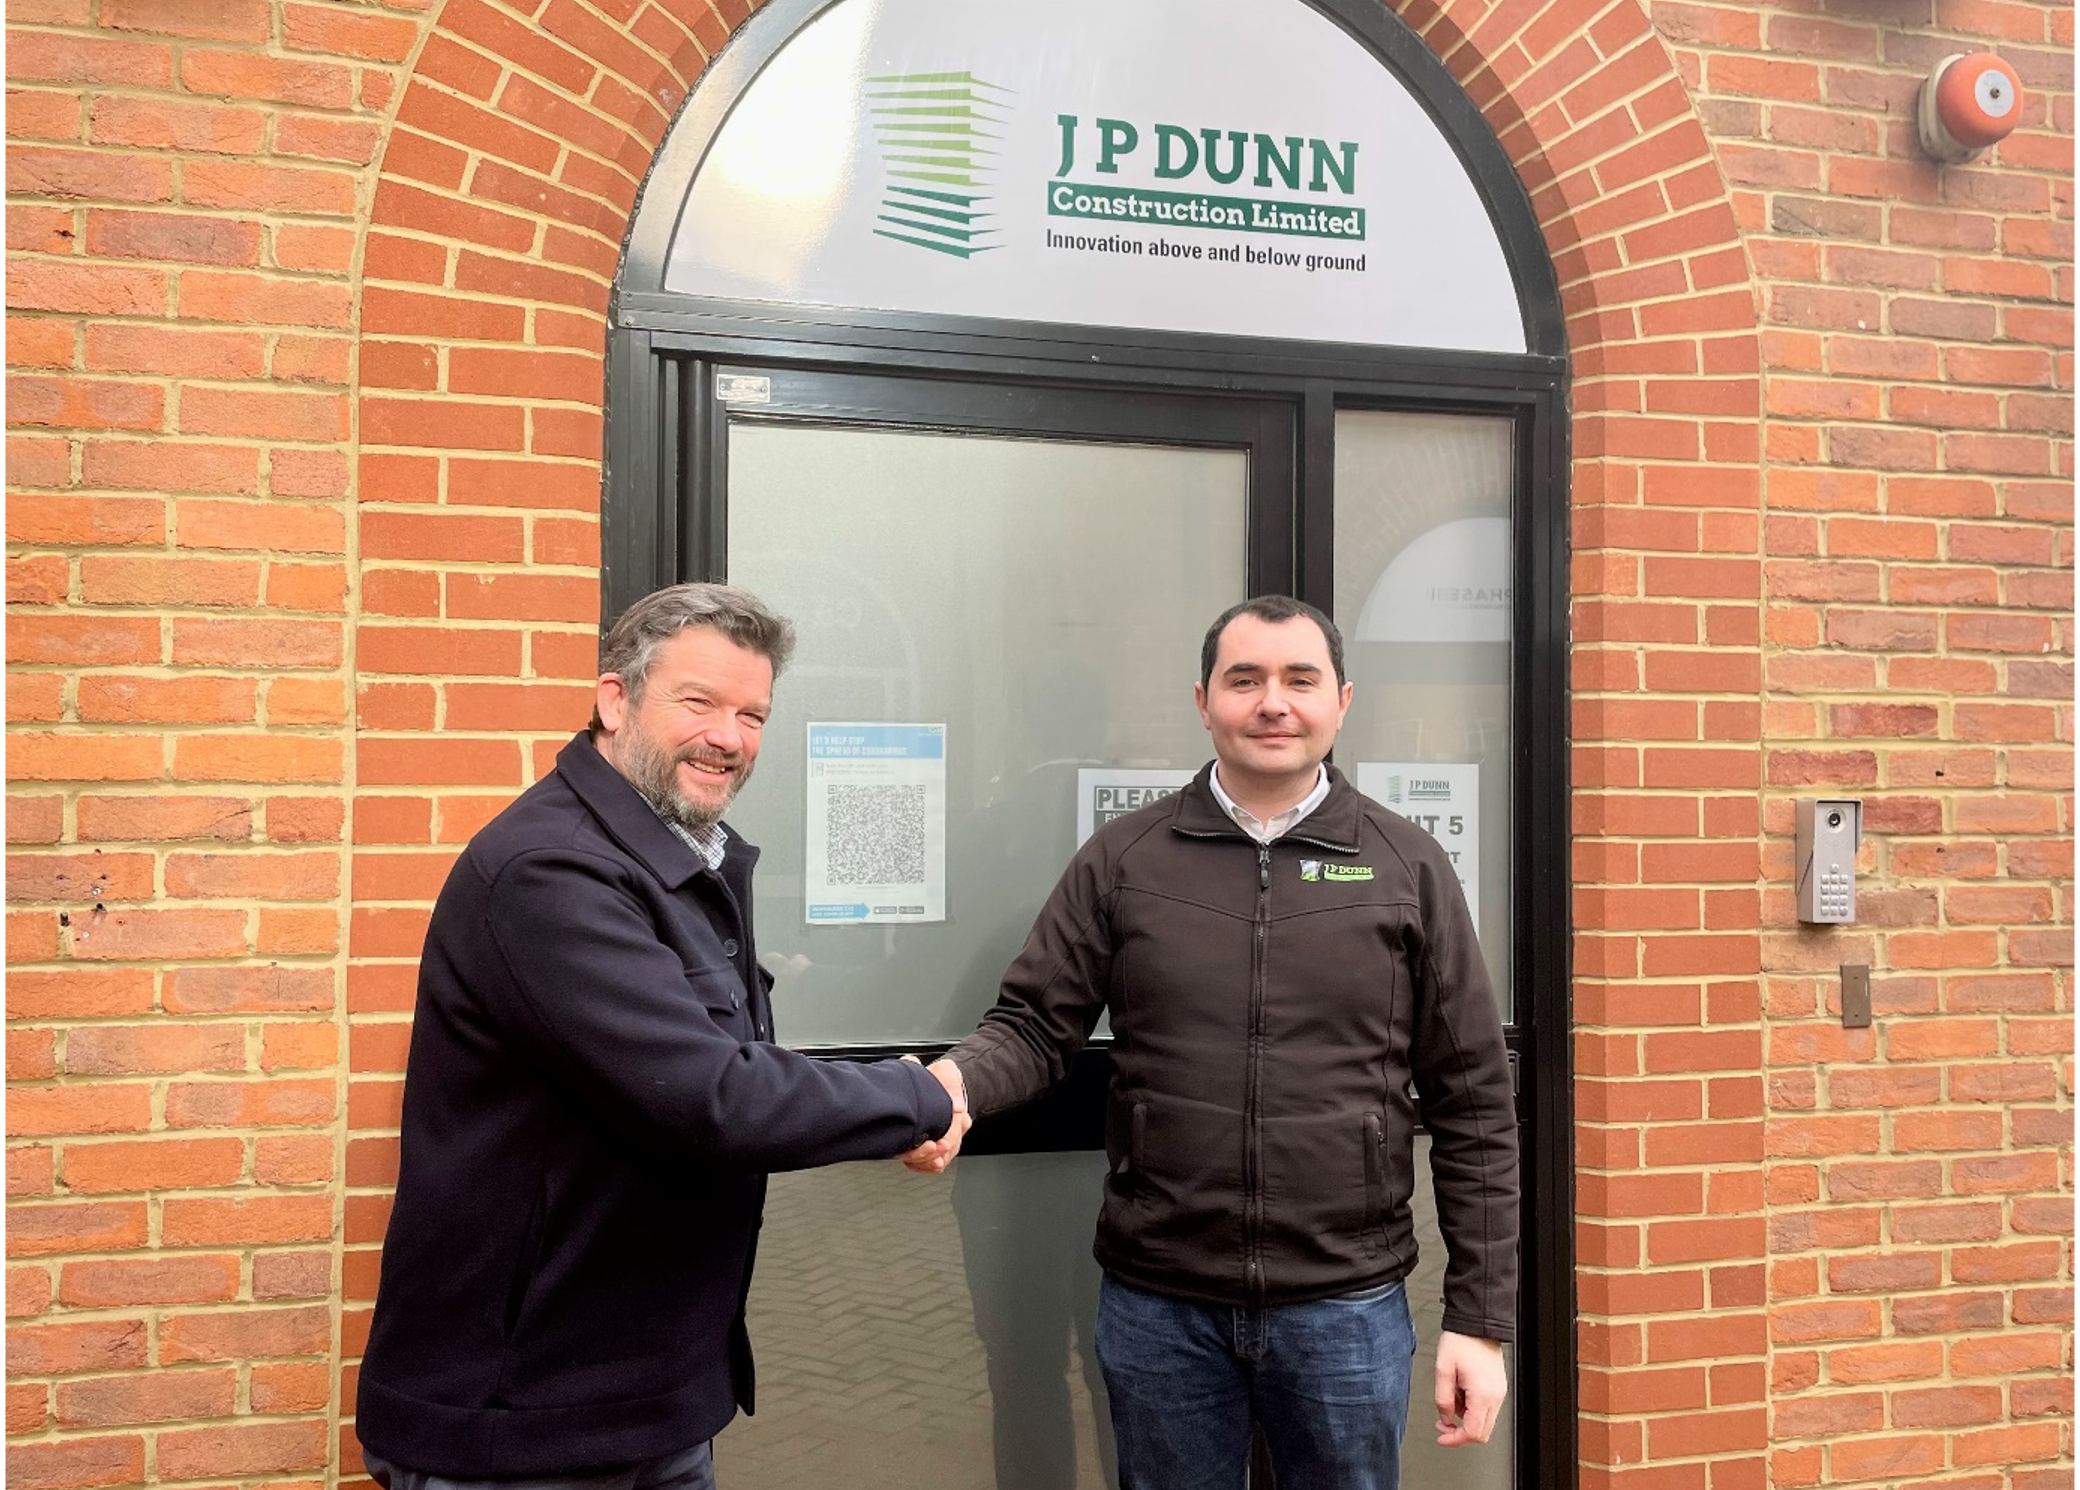 Ian Chats H&S, training, and sustainability with J P Dunn Construction